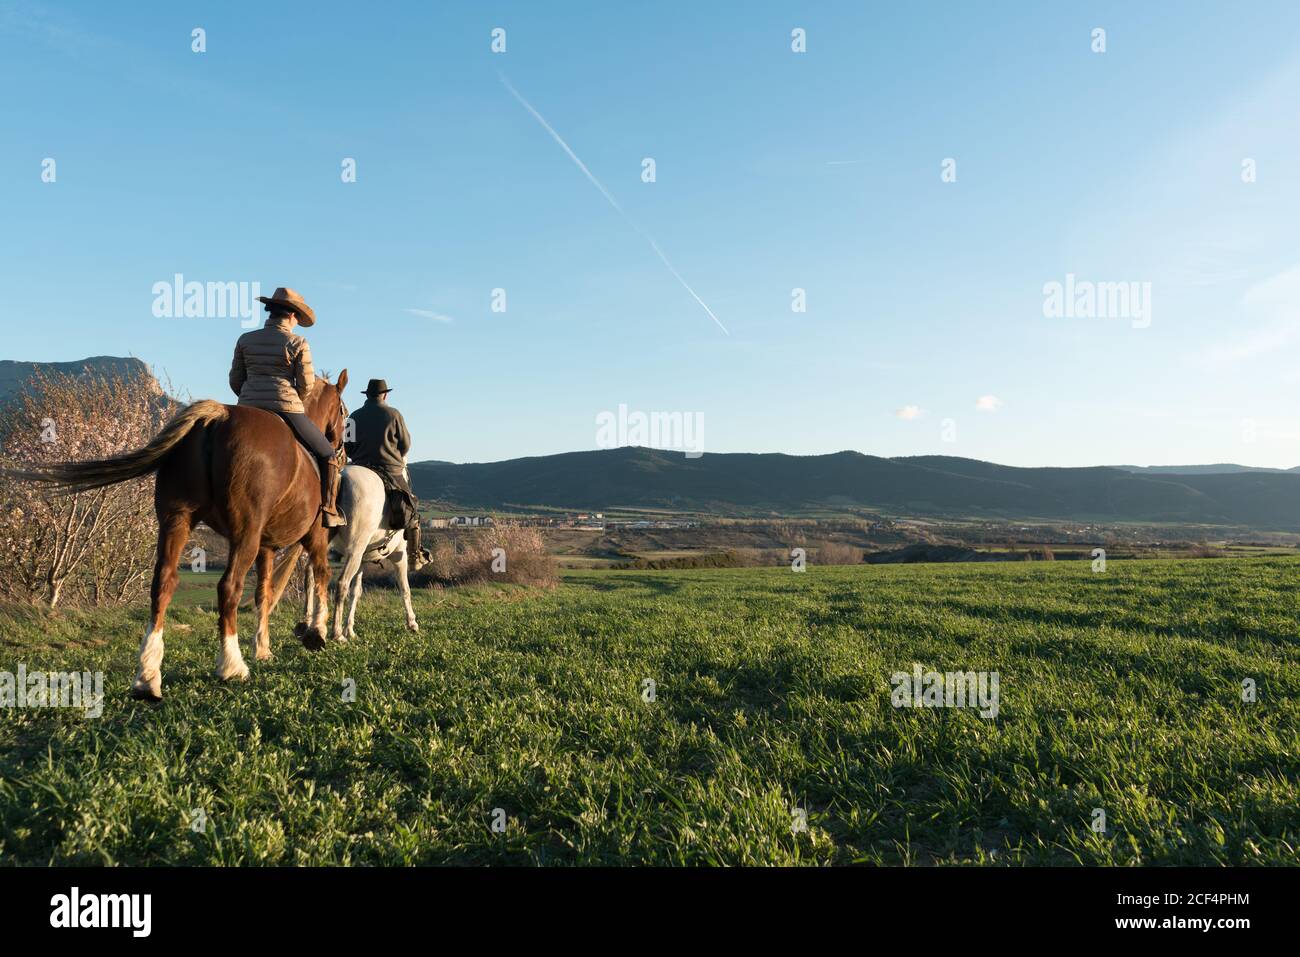 man and Woman riding horses on ranch Stock Photo